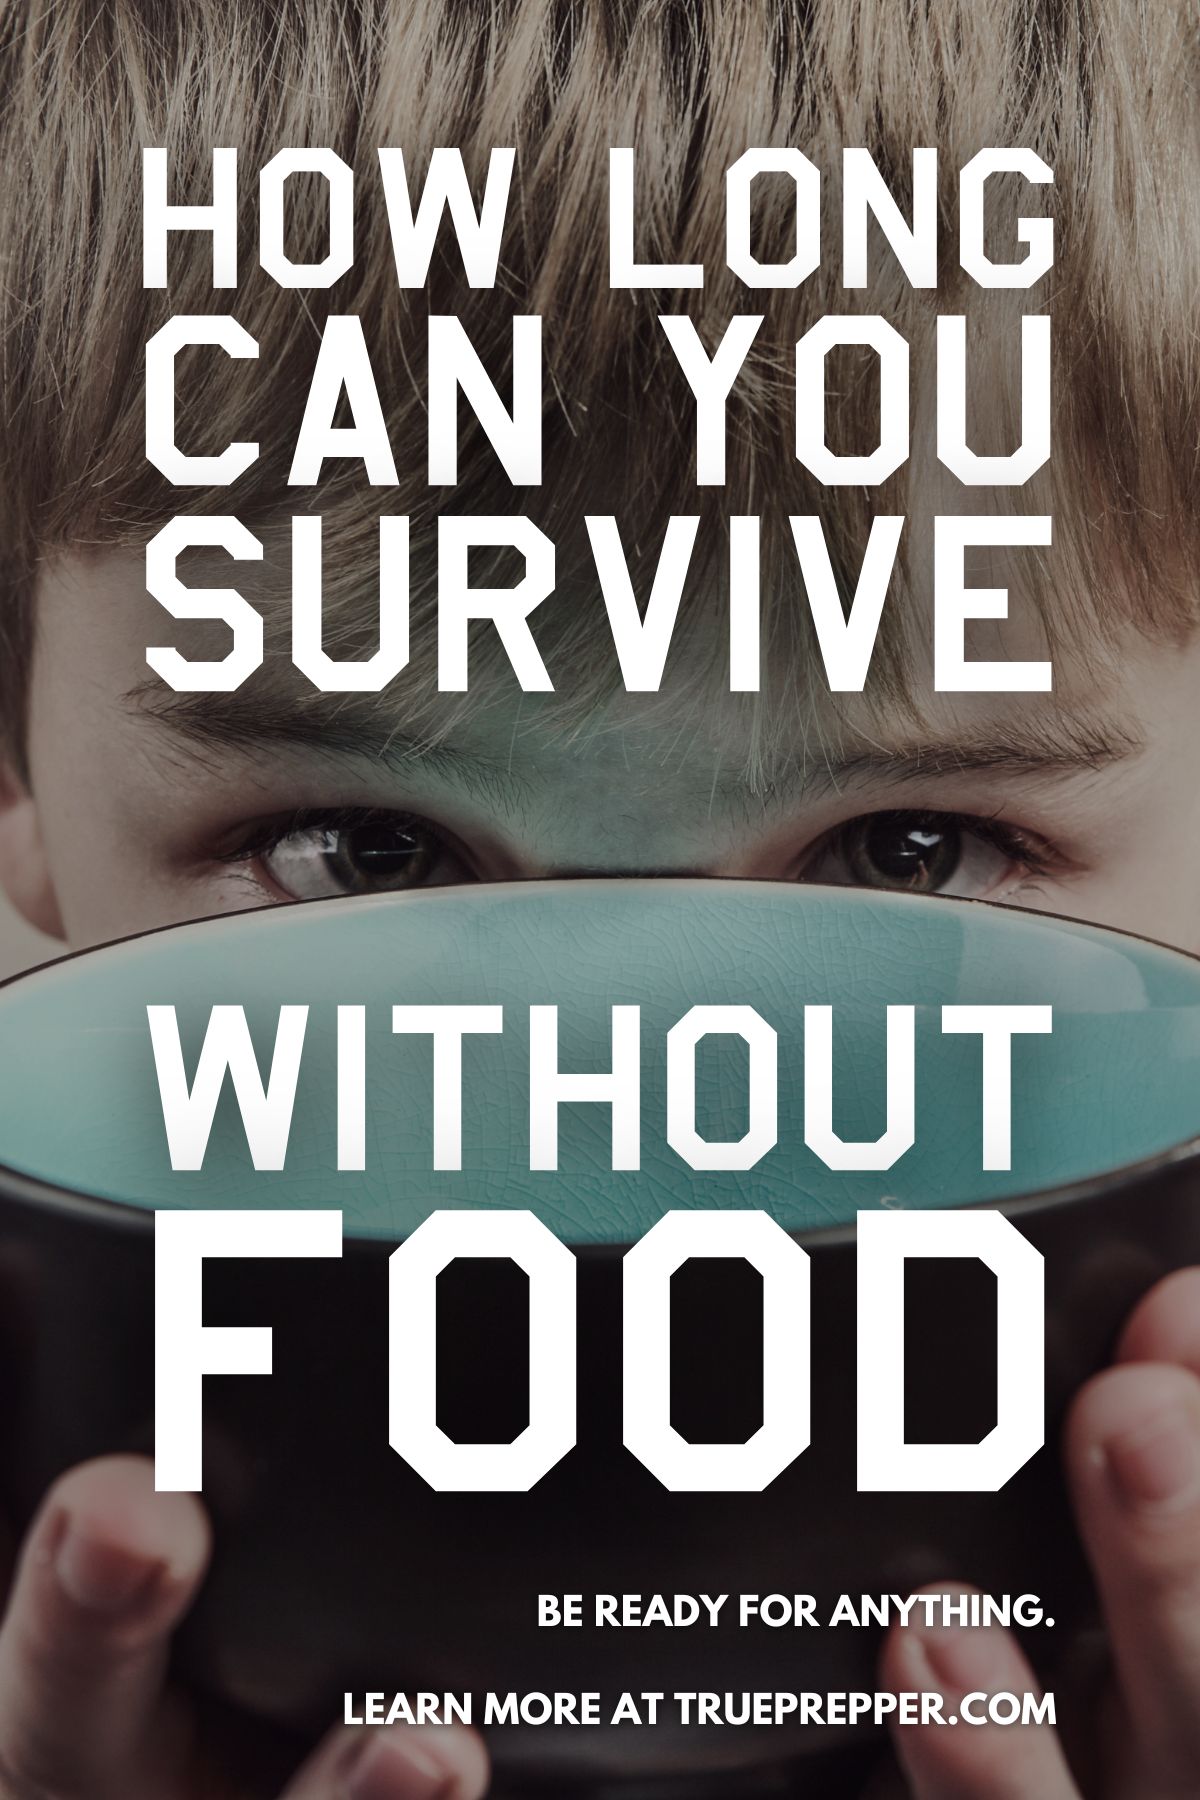 How Long Can You Survive Without Food?